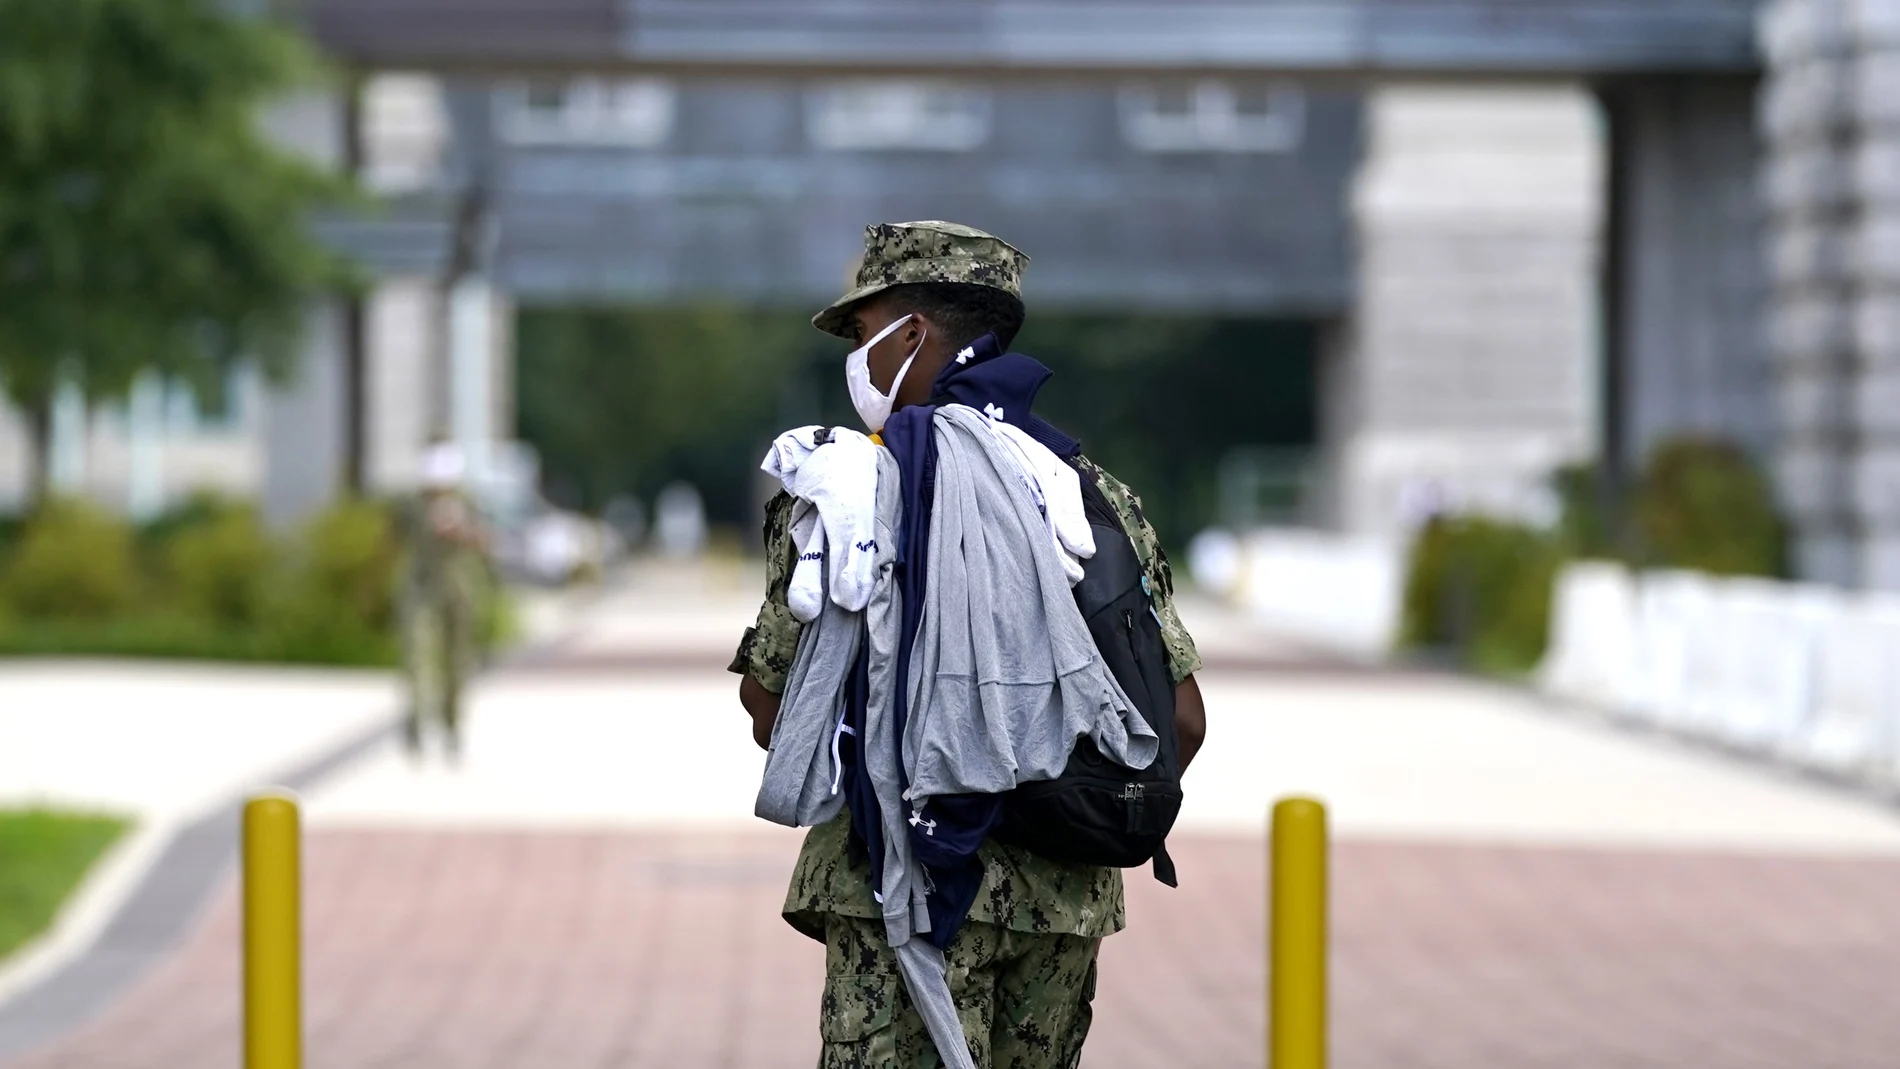 A midshipman wears a face mask to protect against COVID-19 while walking with laundry at the U.S. Naval Academy, Monday, Aug. 24, 2020, in Annapolis, Under the siege of the coronavirus pandemic, classes have begun at the Naval Academy, the Air Force Academy and the U.S. Military Academy at West Point. But unlike at many colleges around the country, most students are on campus and many will attend classes in person. Md. (AP Photo/Julio Cortez)